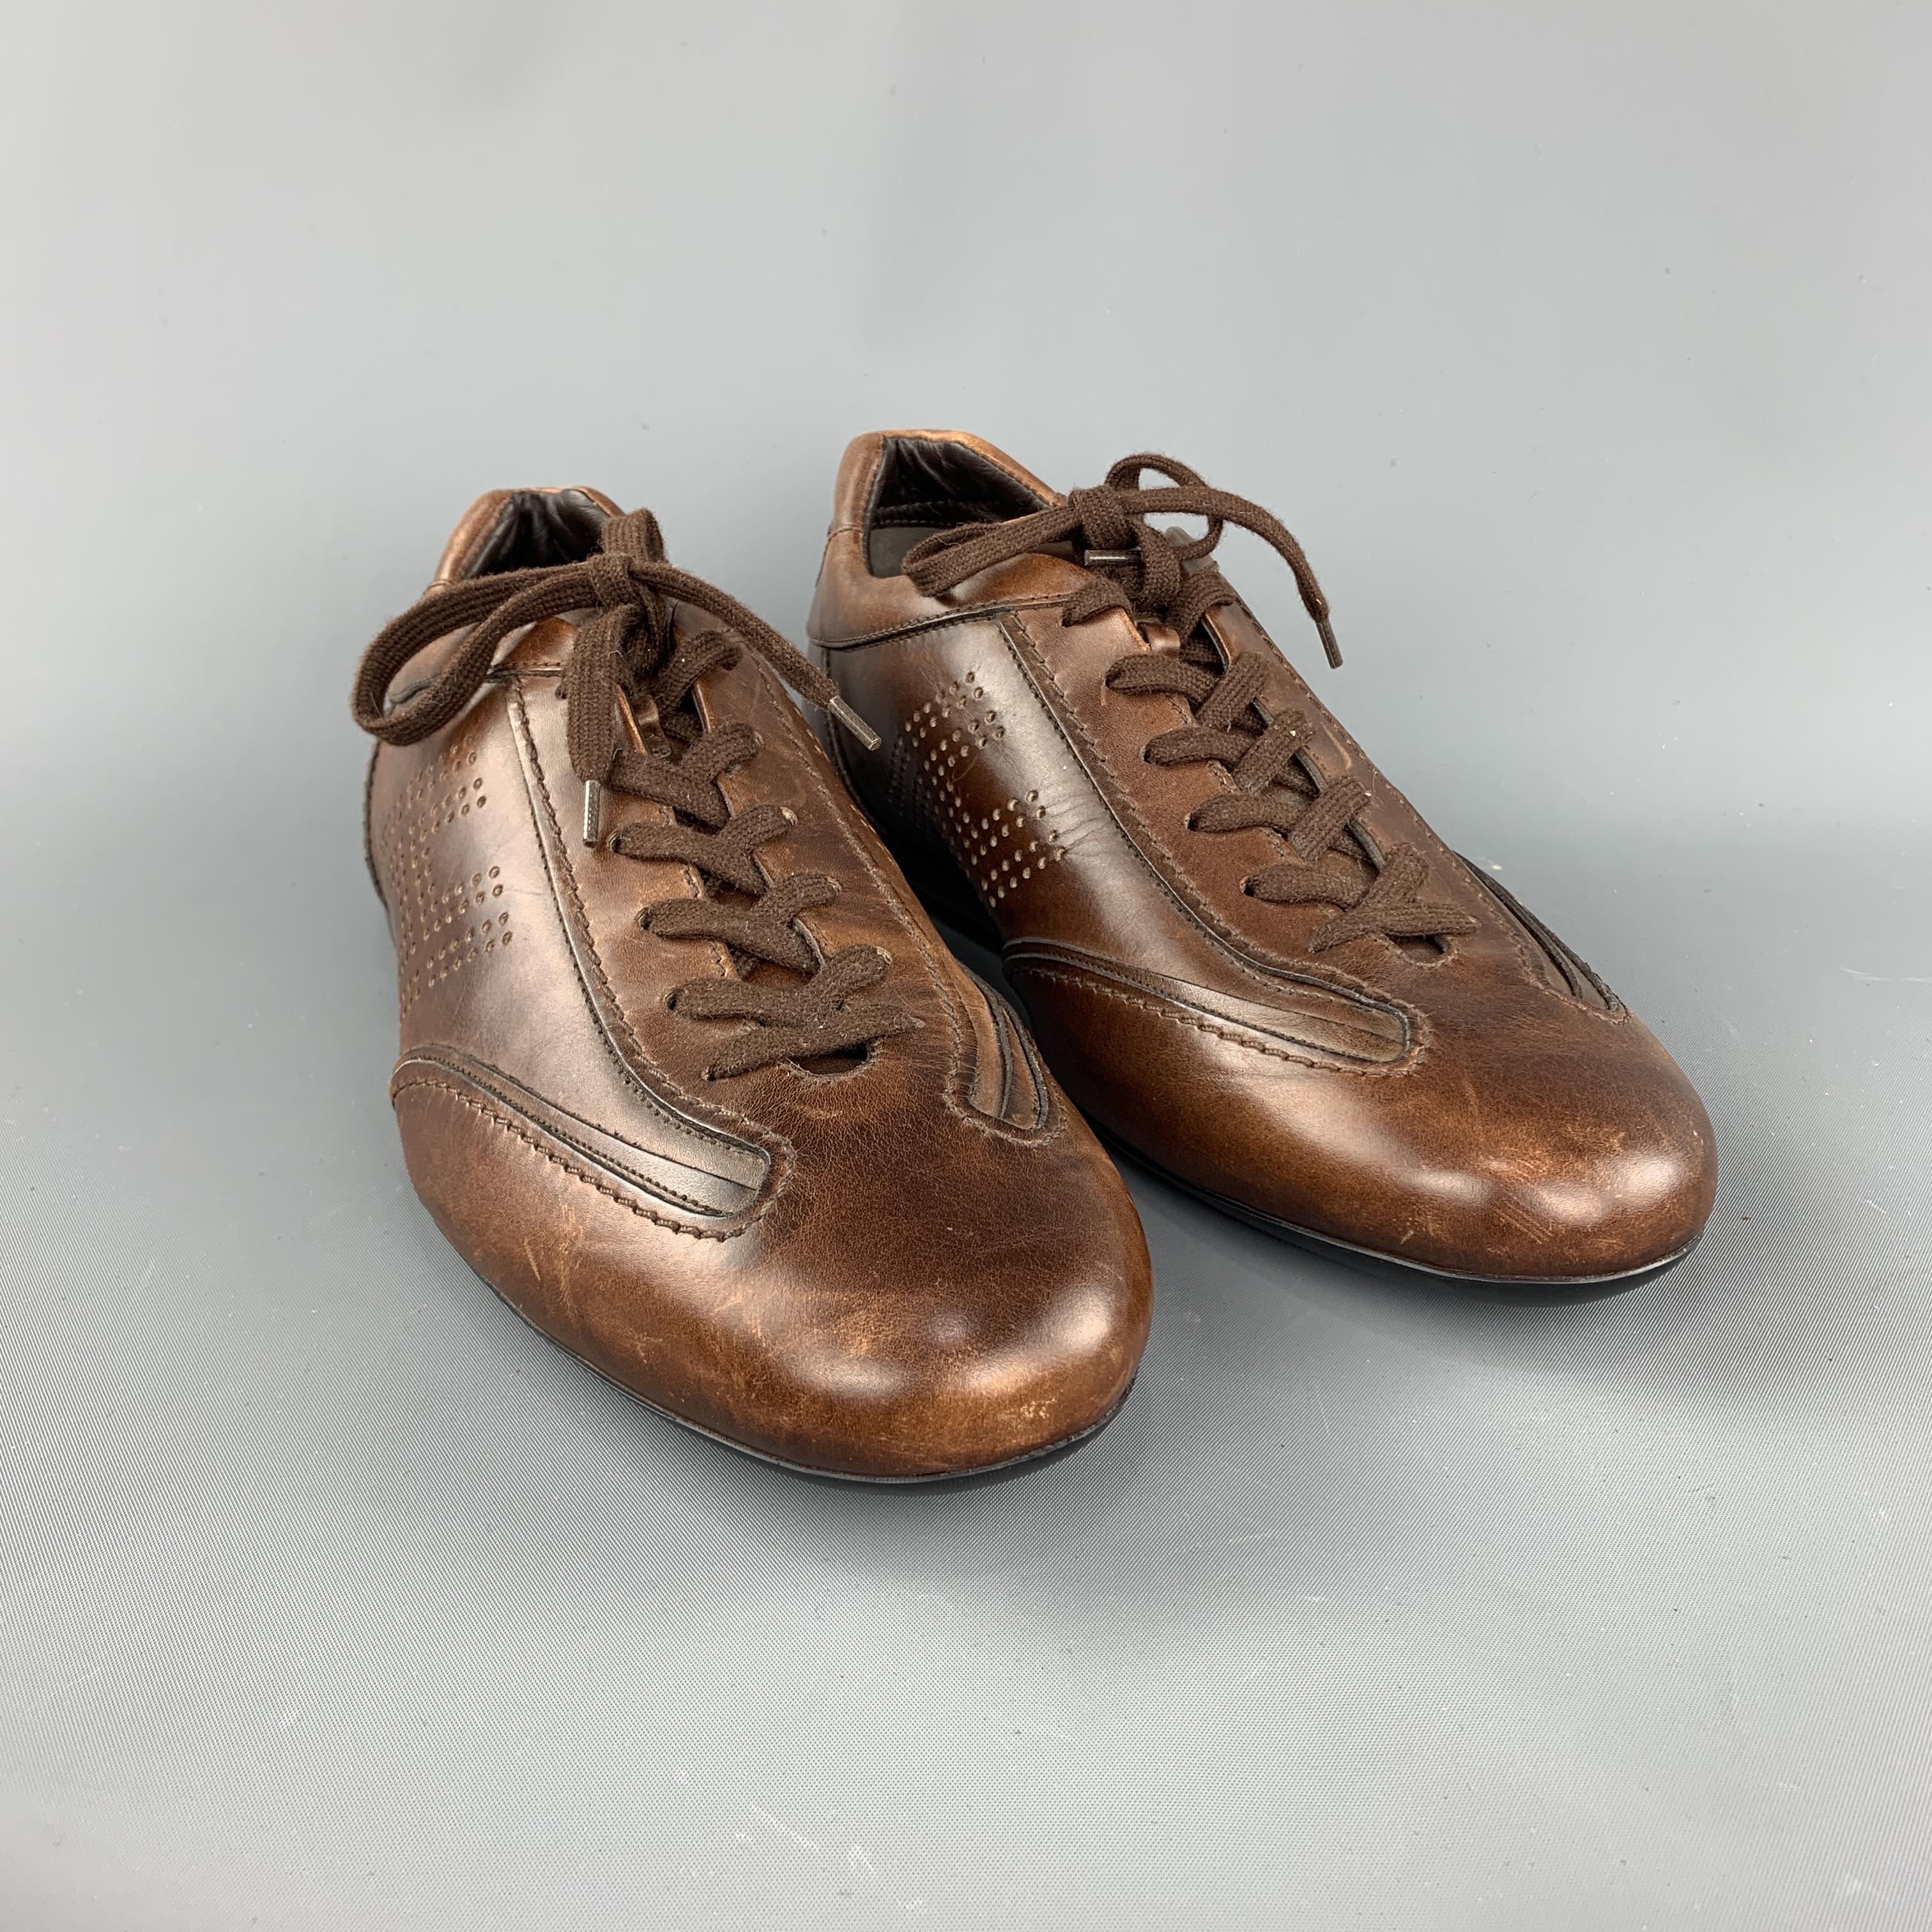 HOGAN lace up shoe comes in a brown perforated leather featuring a lace up style and a rubber sole. Made in Italy.
 
Excellent Pre-Owned Condition.
Marked: 10
 
Measurements:
 
Outsole: 12.5 in x 4.5 in.